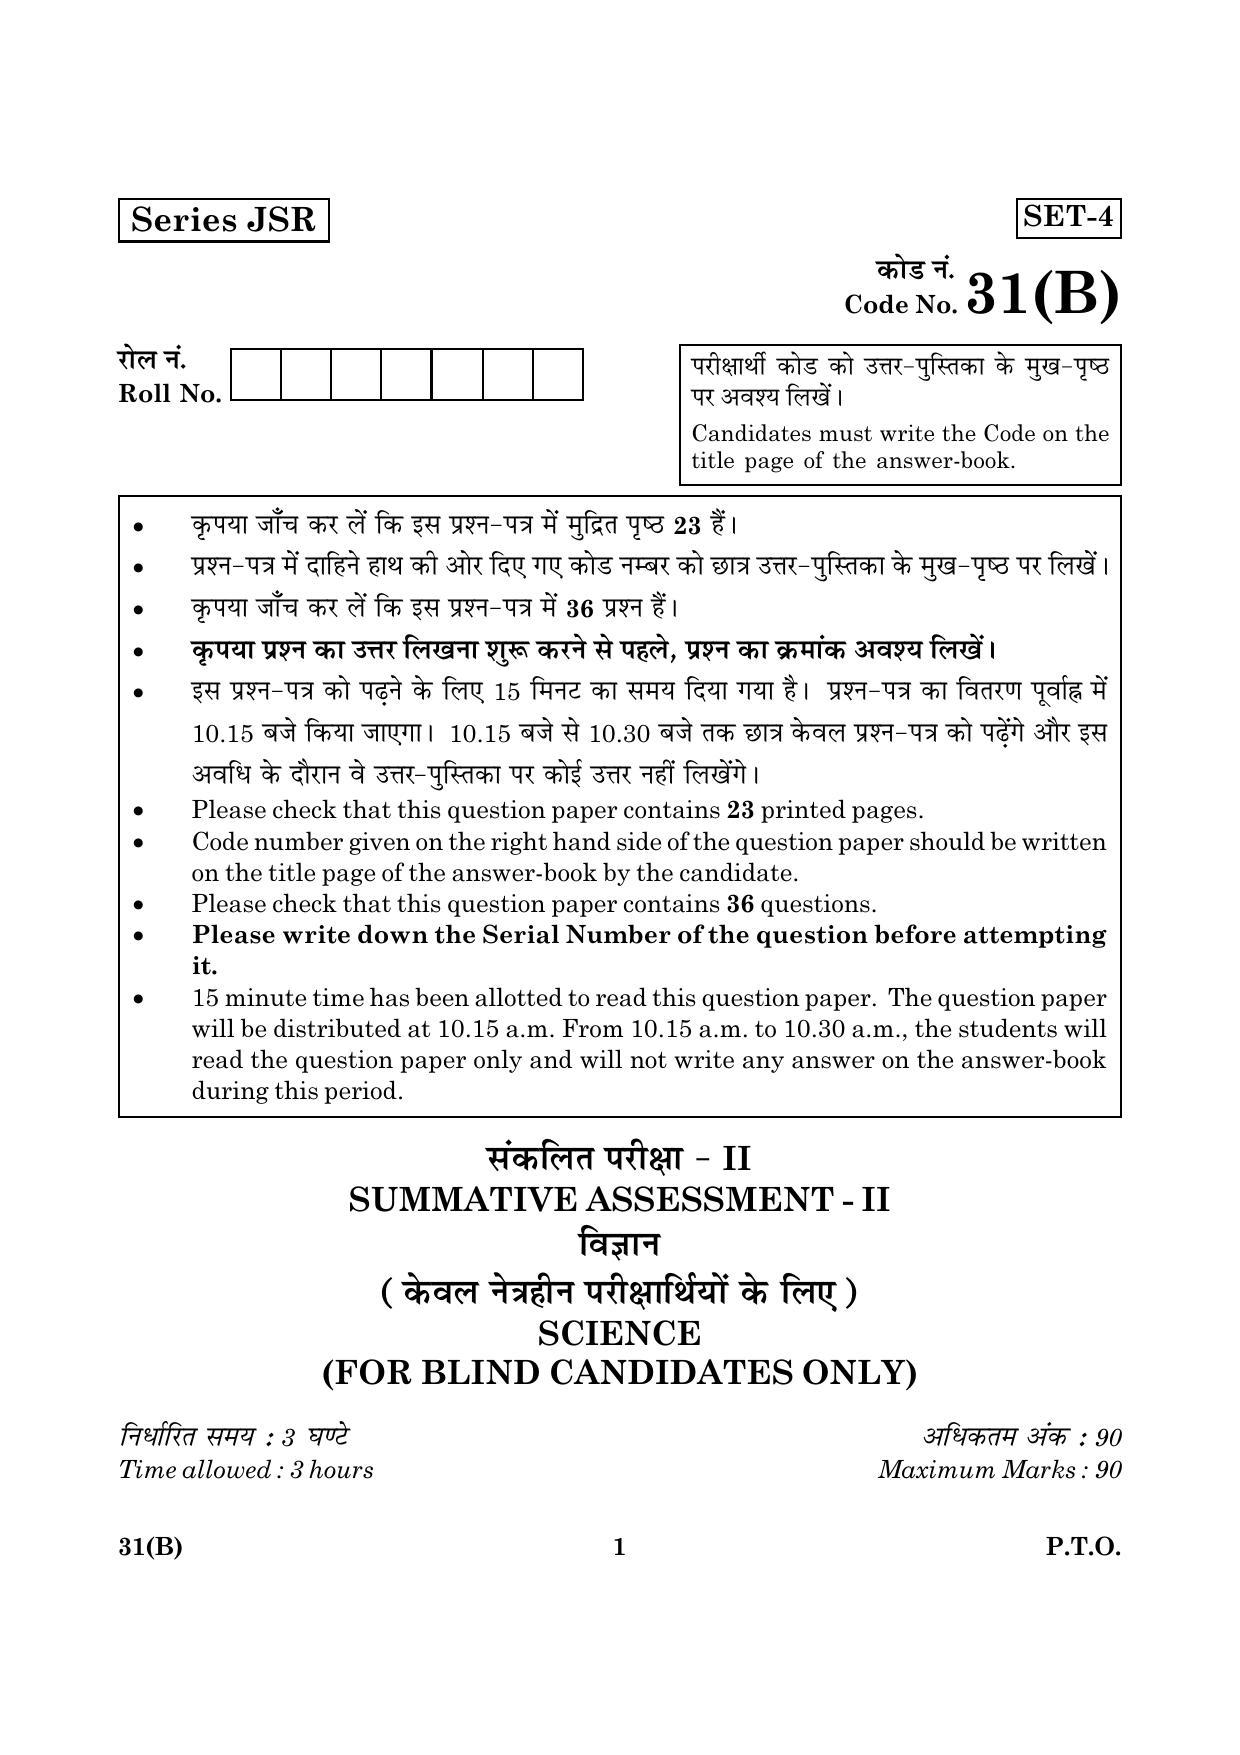 CBSE Class 10 031(B) Science 2016 Question Paper - Page 1